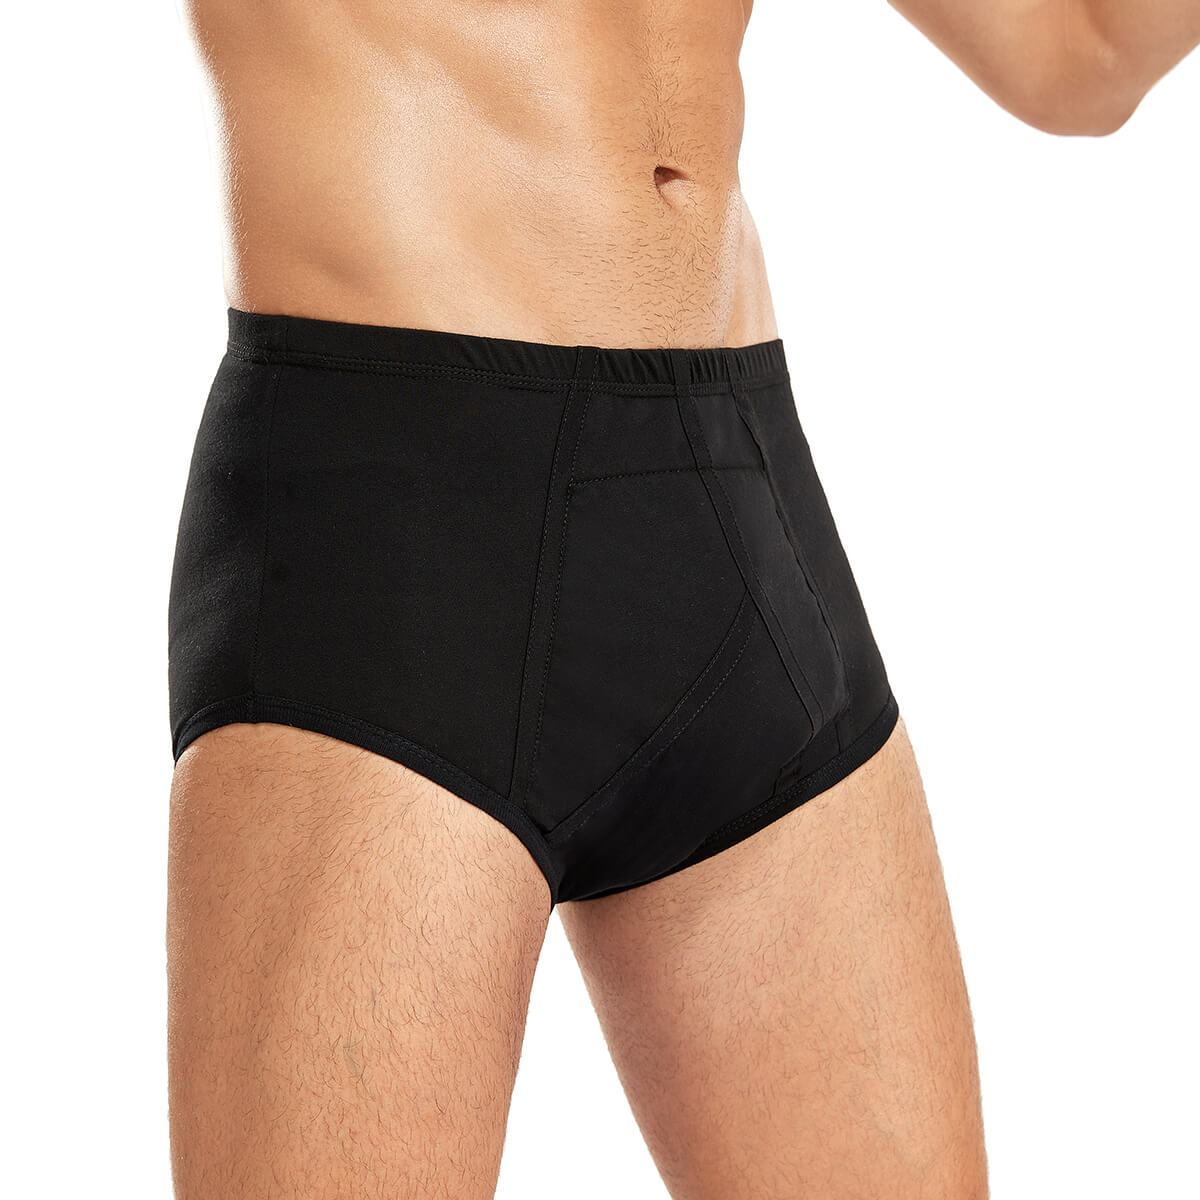 Assurance Incontinence Pull-Up Underwear for Men, Maximum Absorbency, S/M/L/ XL ✓